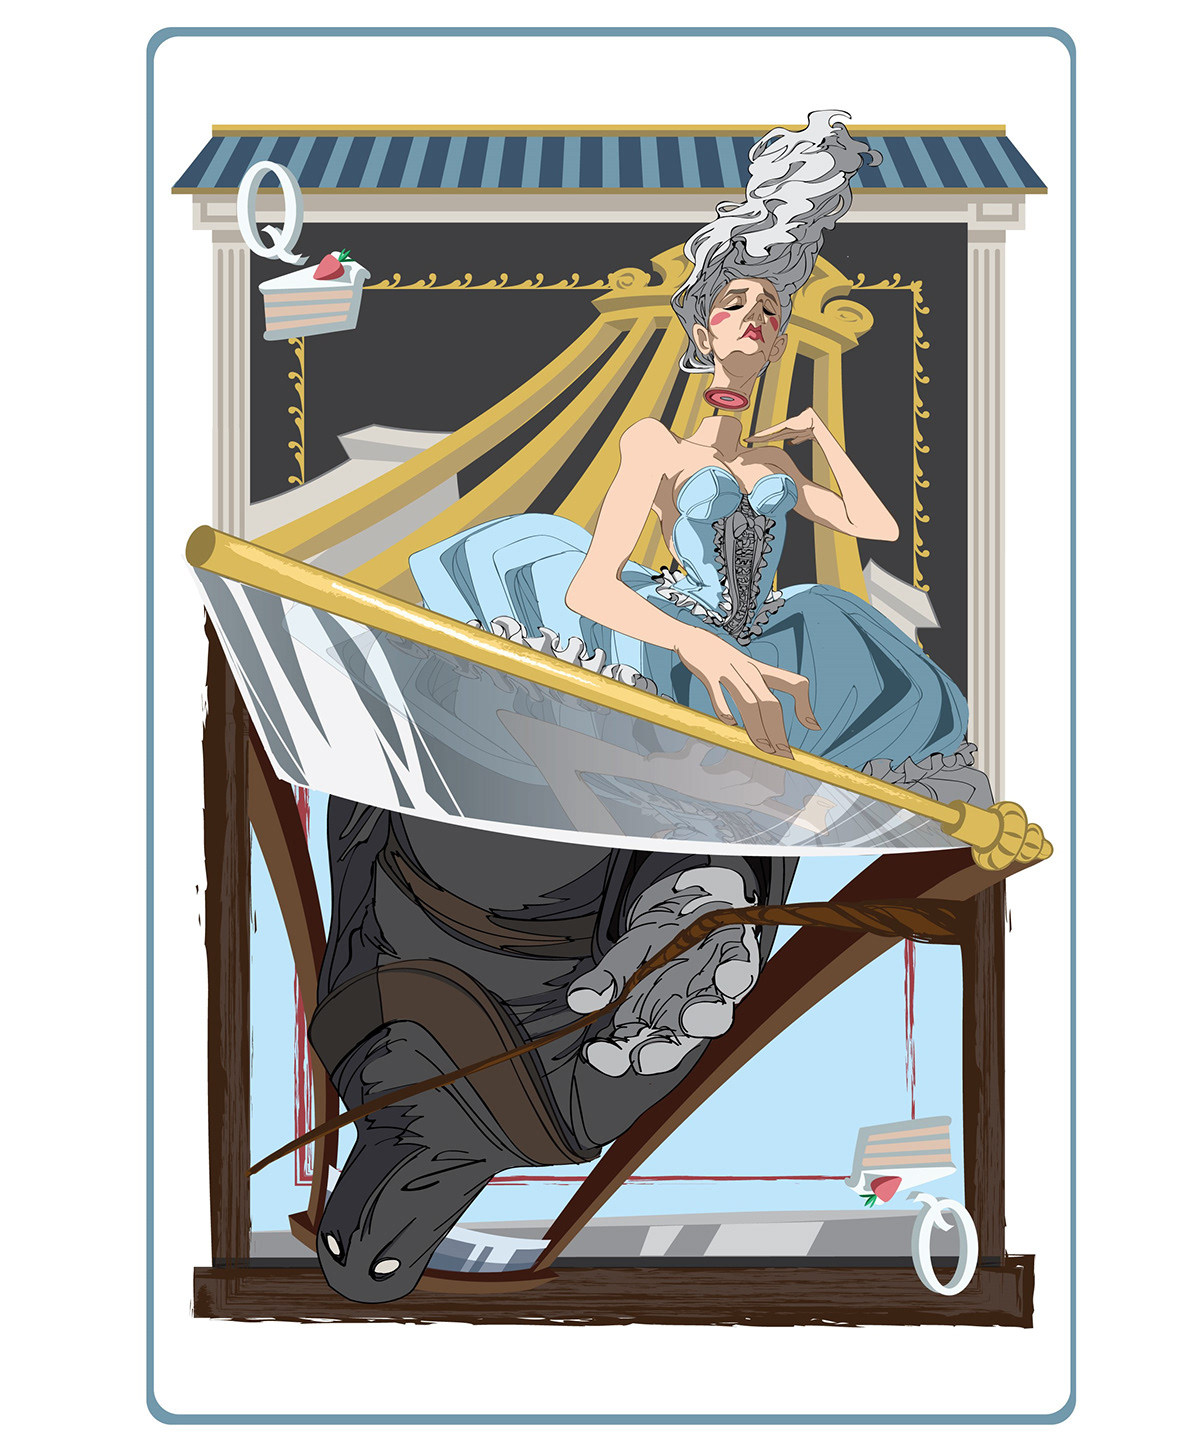 playing card Trading Card marie antoinette guillotine ILLUSTRATION  Digital Art  fortune flip French